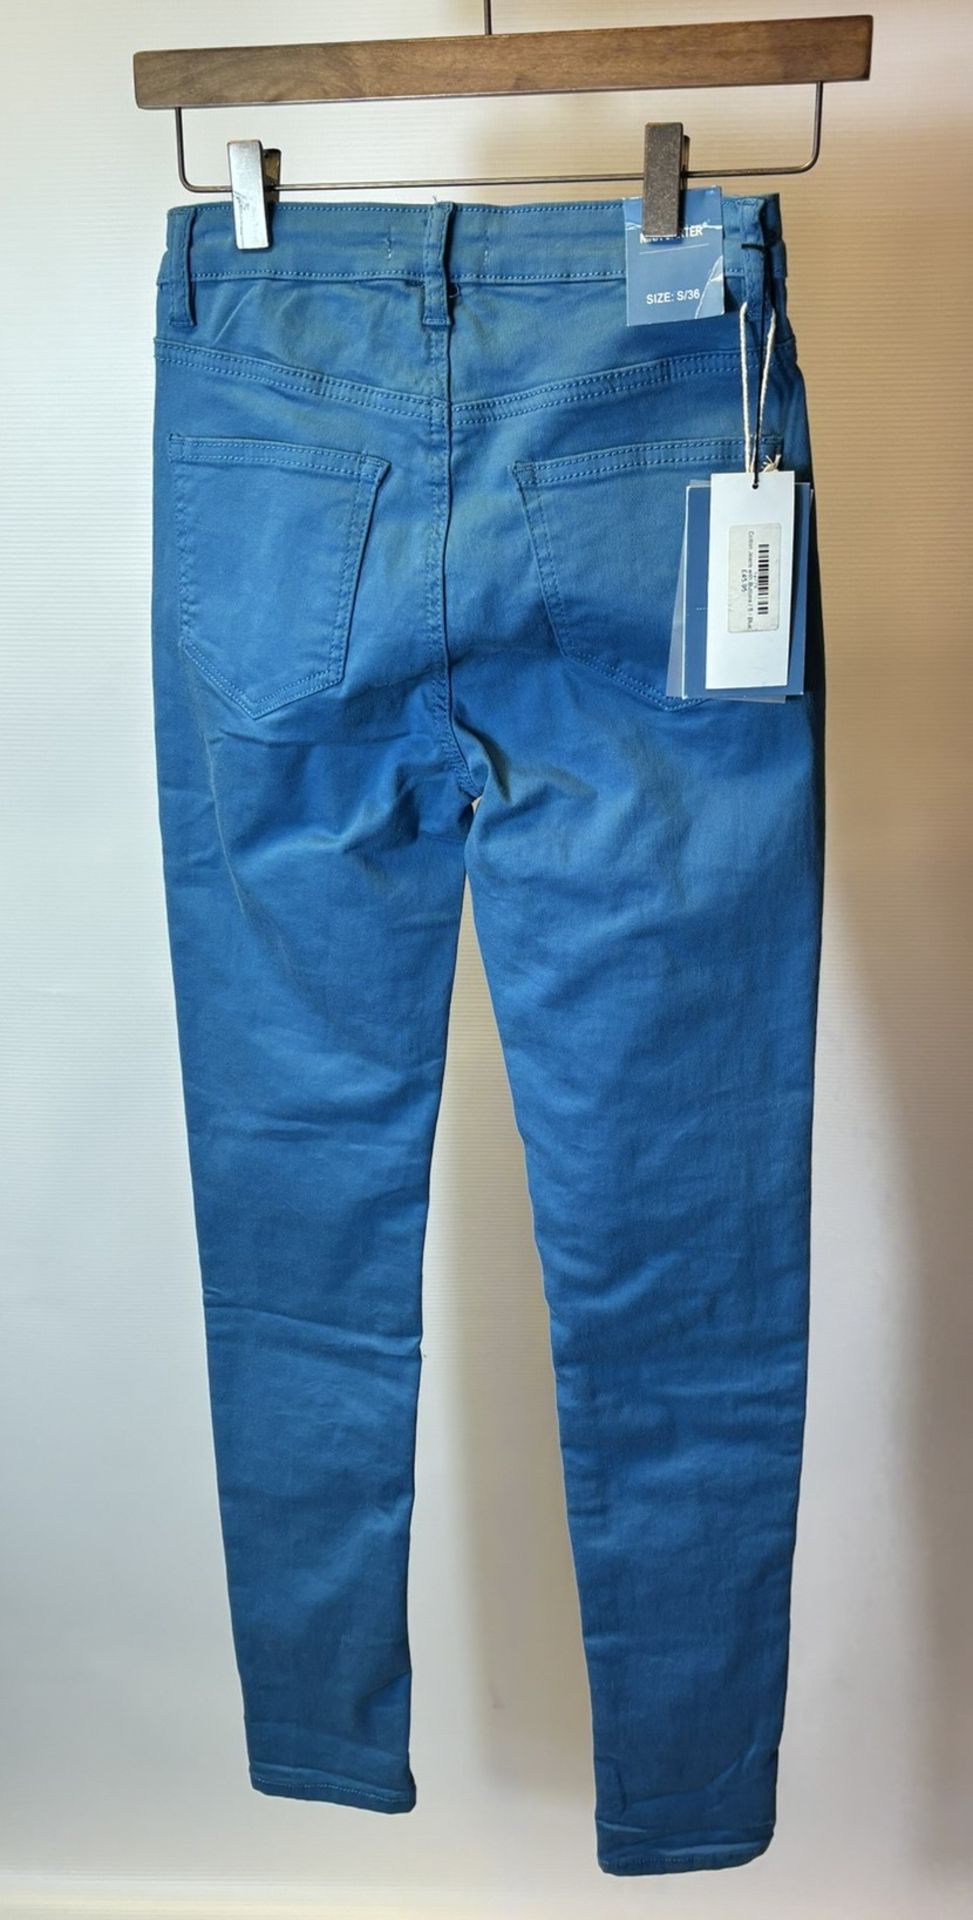 12 x Various Pairs Of Women's Trousers/Jeans As Seen In Photos - Bild 32 aus 36